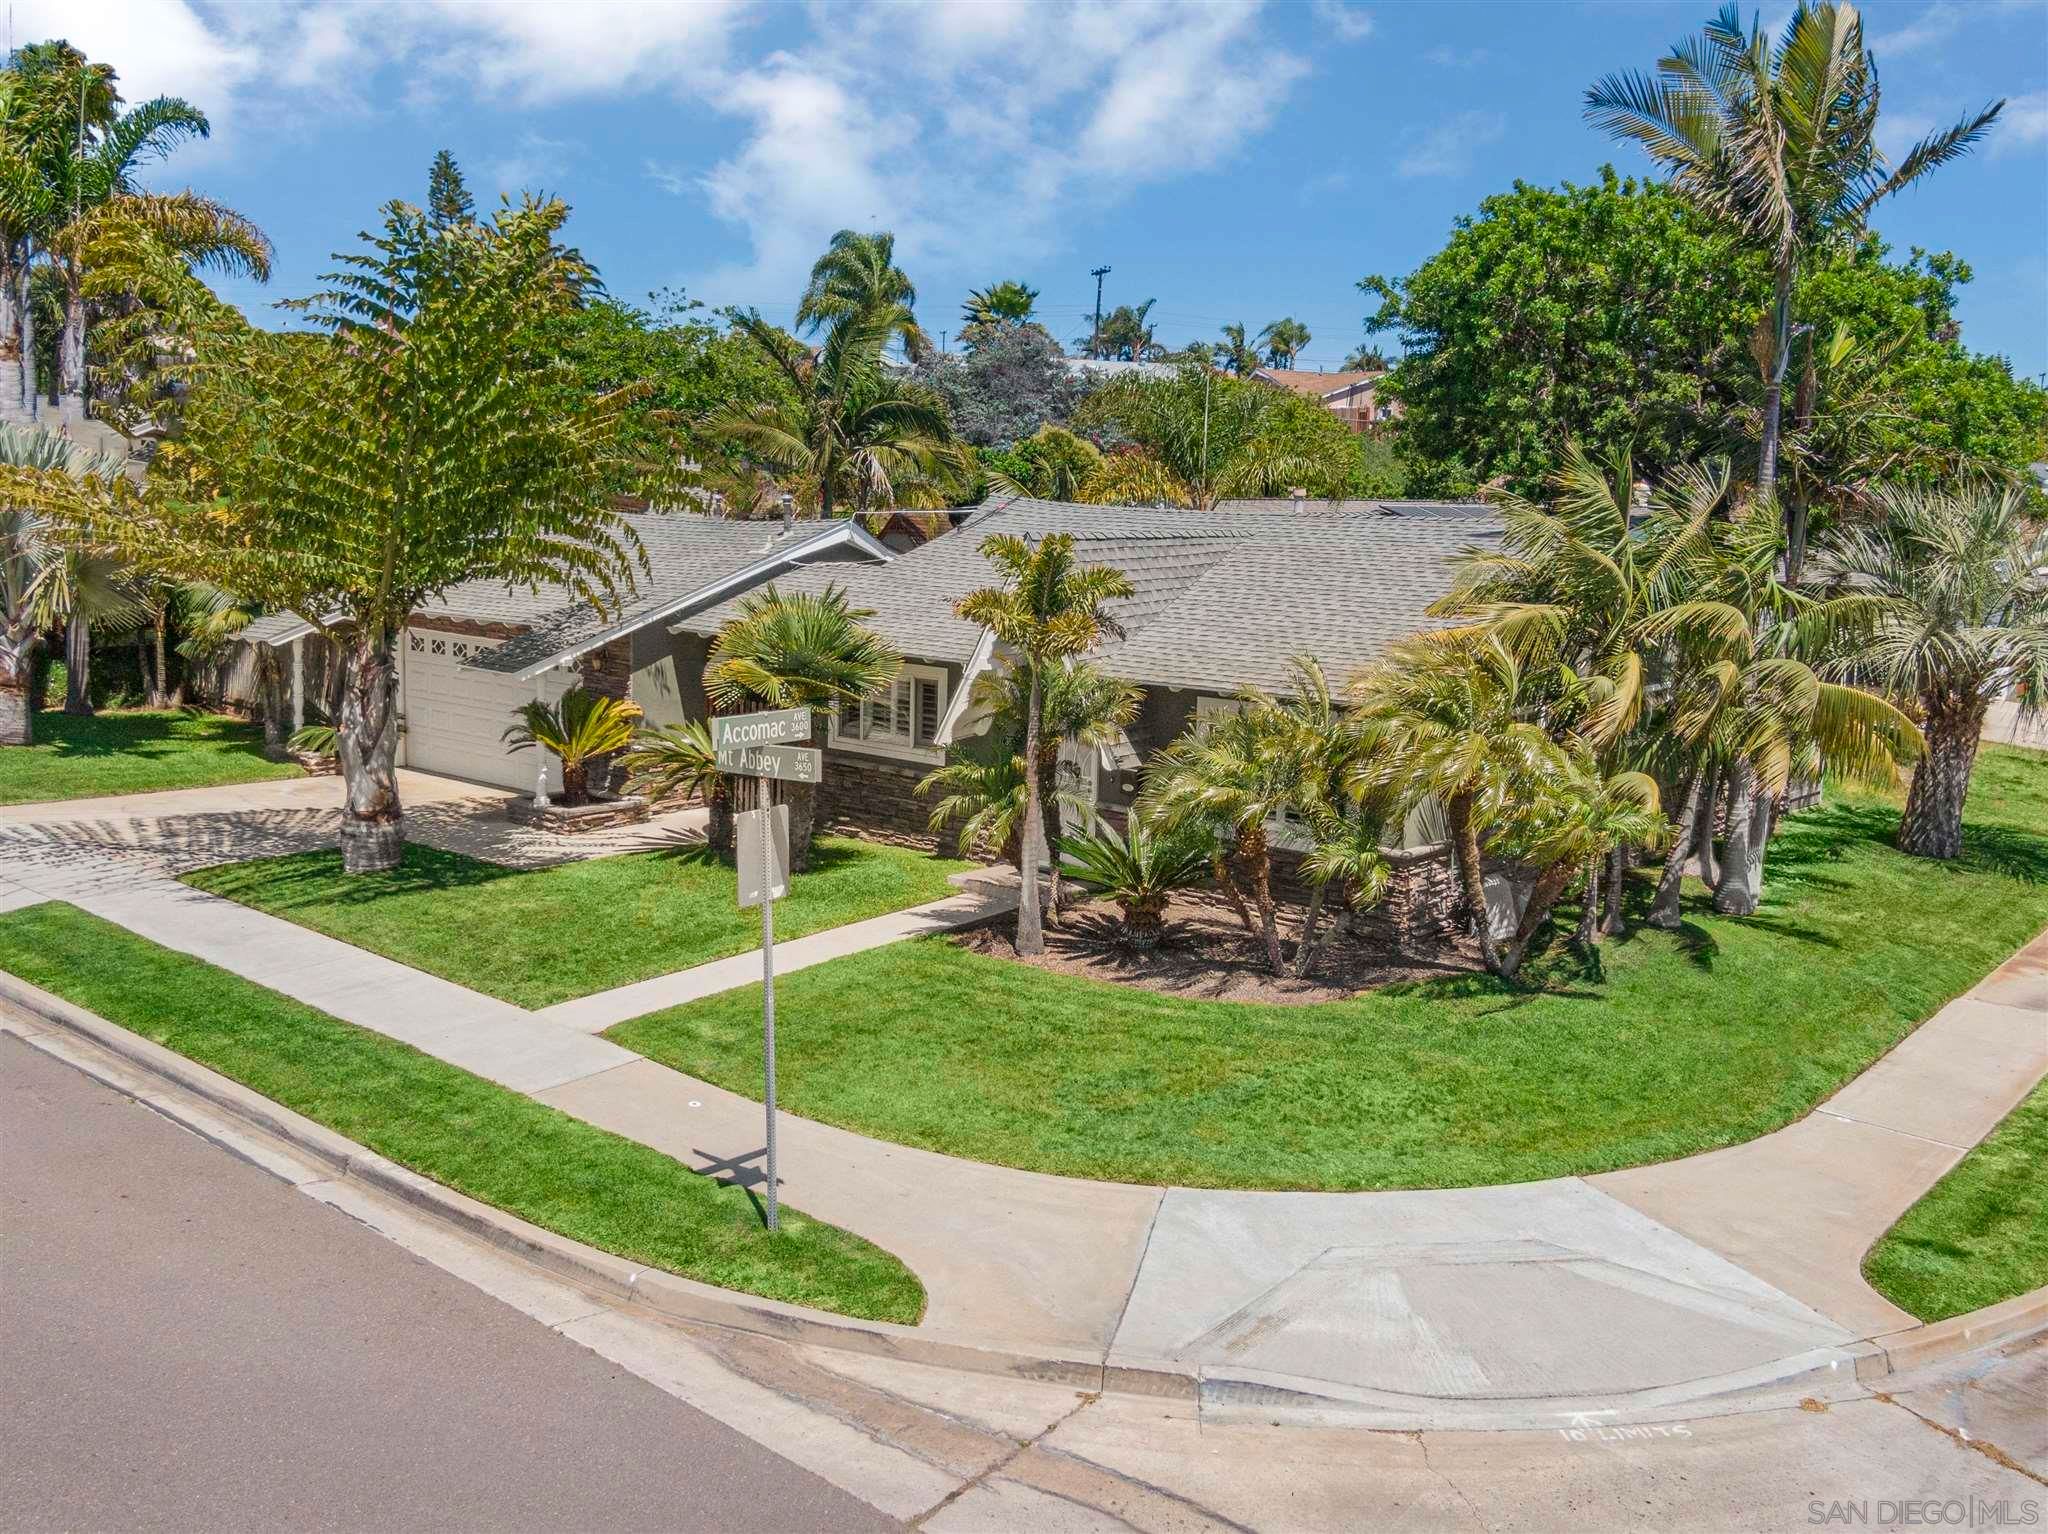 I have sold a property at 3651 Mount Abbey Ave in San Diego
